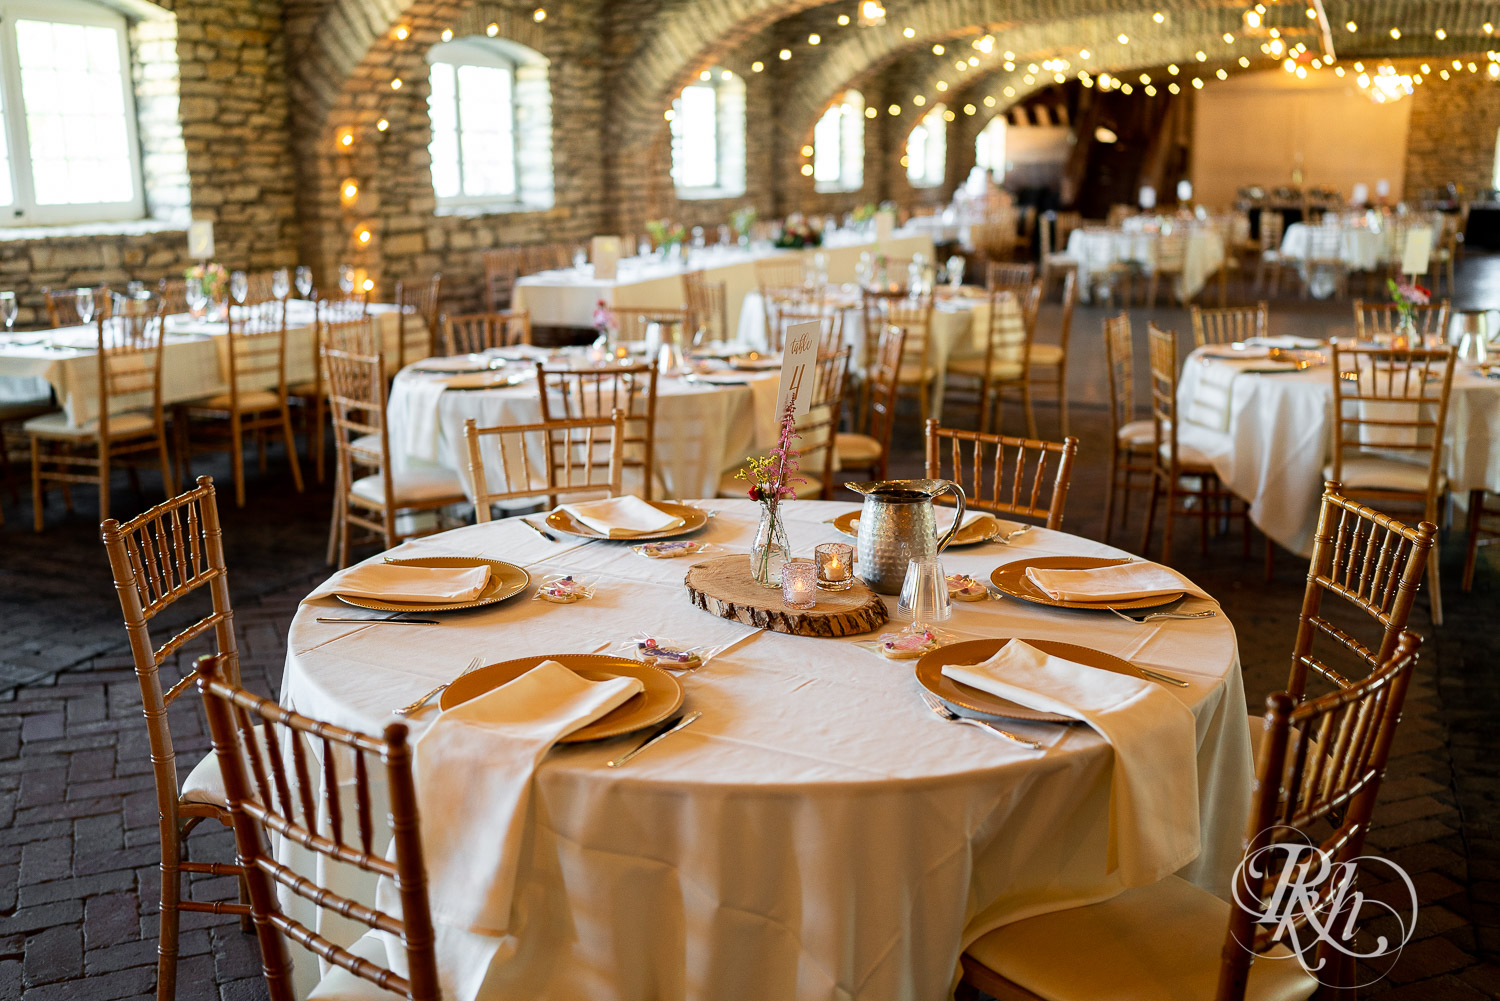 Indoor barn wedding reception setup with pink and white accents at Mayowood Stone Barn in Rochester, Minnesota.